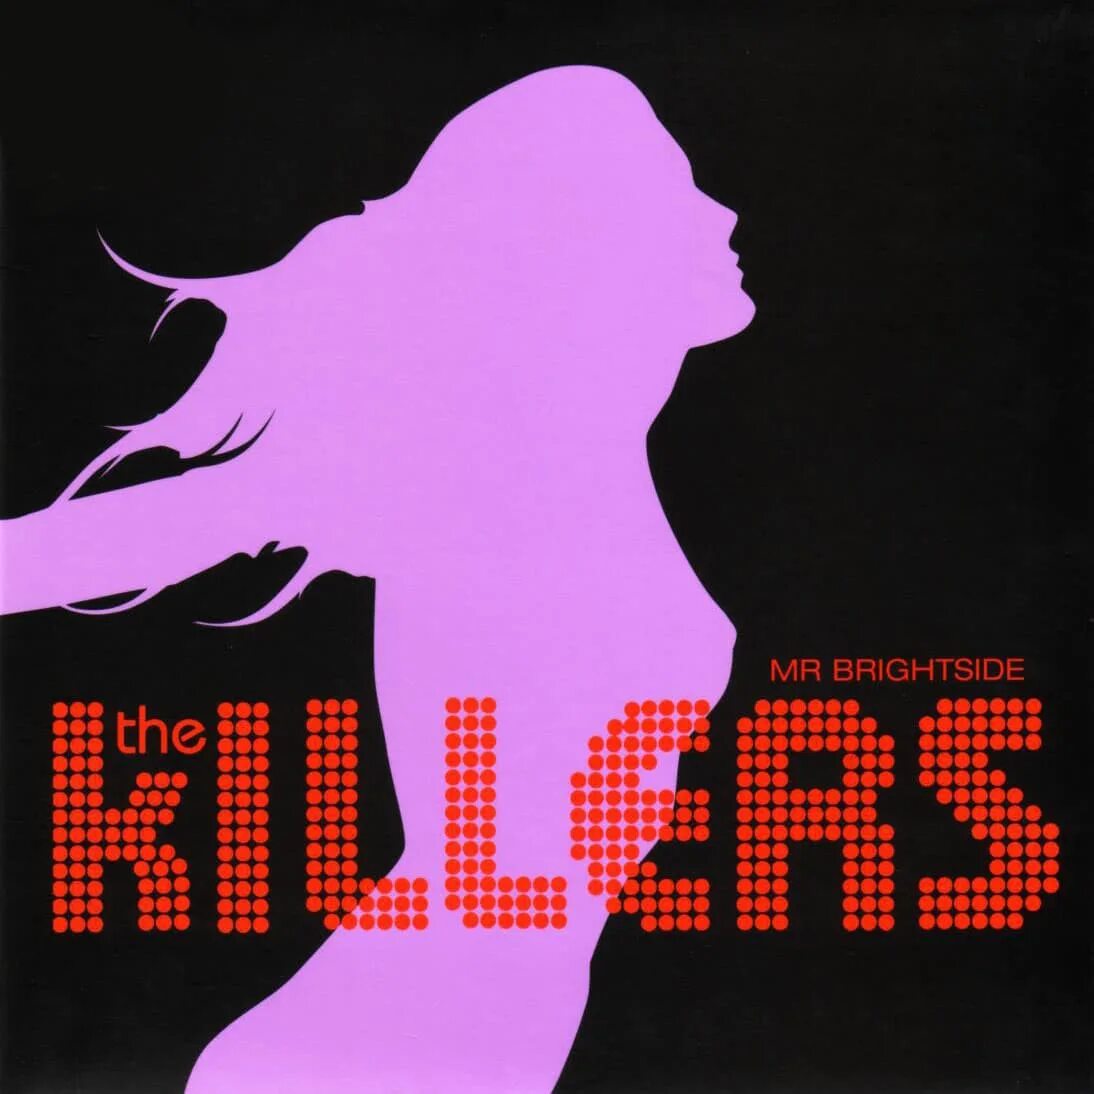 The Killers - Mr. Brightside Жанр. The Killers альбомы. The Killers обложки альбомов. Somebody told me трек – the Killers. Killers brightside перевод